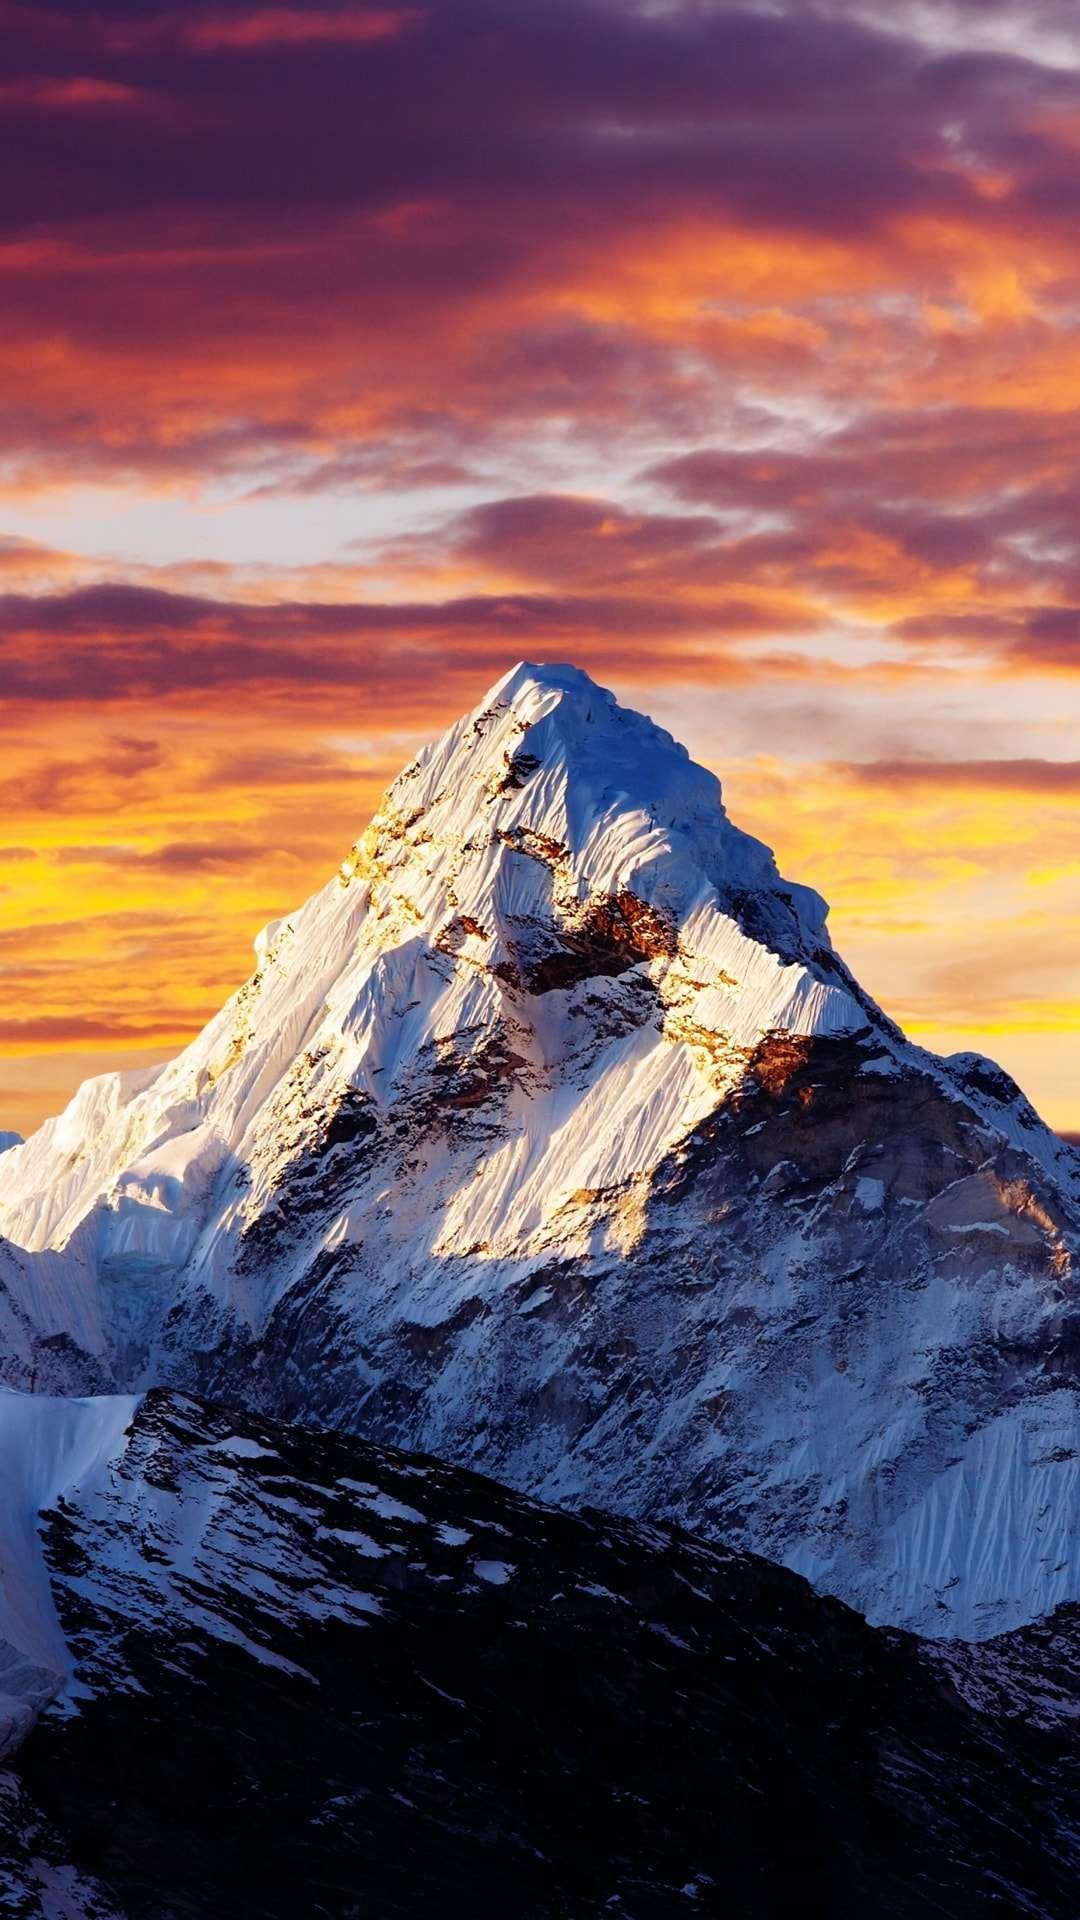 Alps Snow Mountain Sunset Clouds iPhone Wallpaper. Landscape wallpaper, Mountain paintings, Nature wallpaper